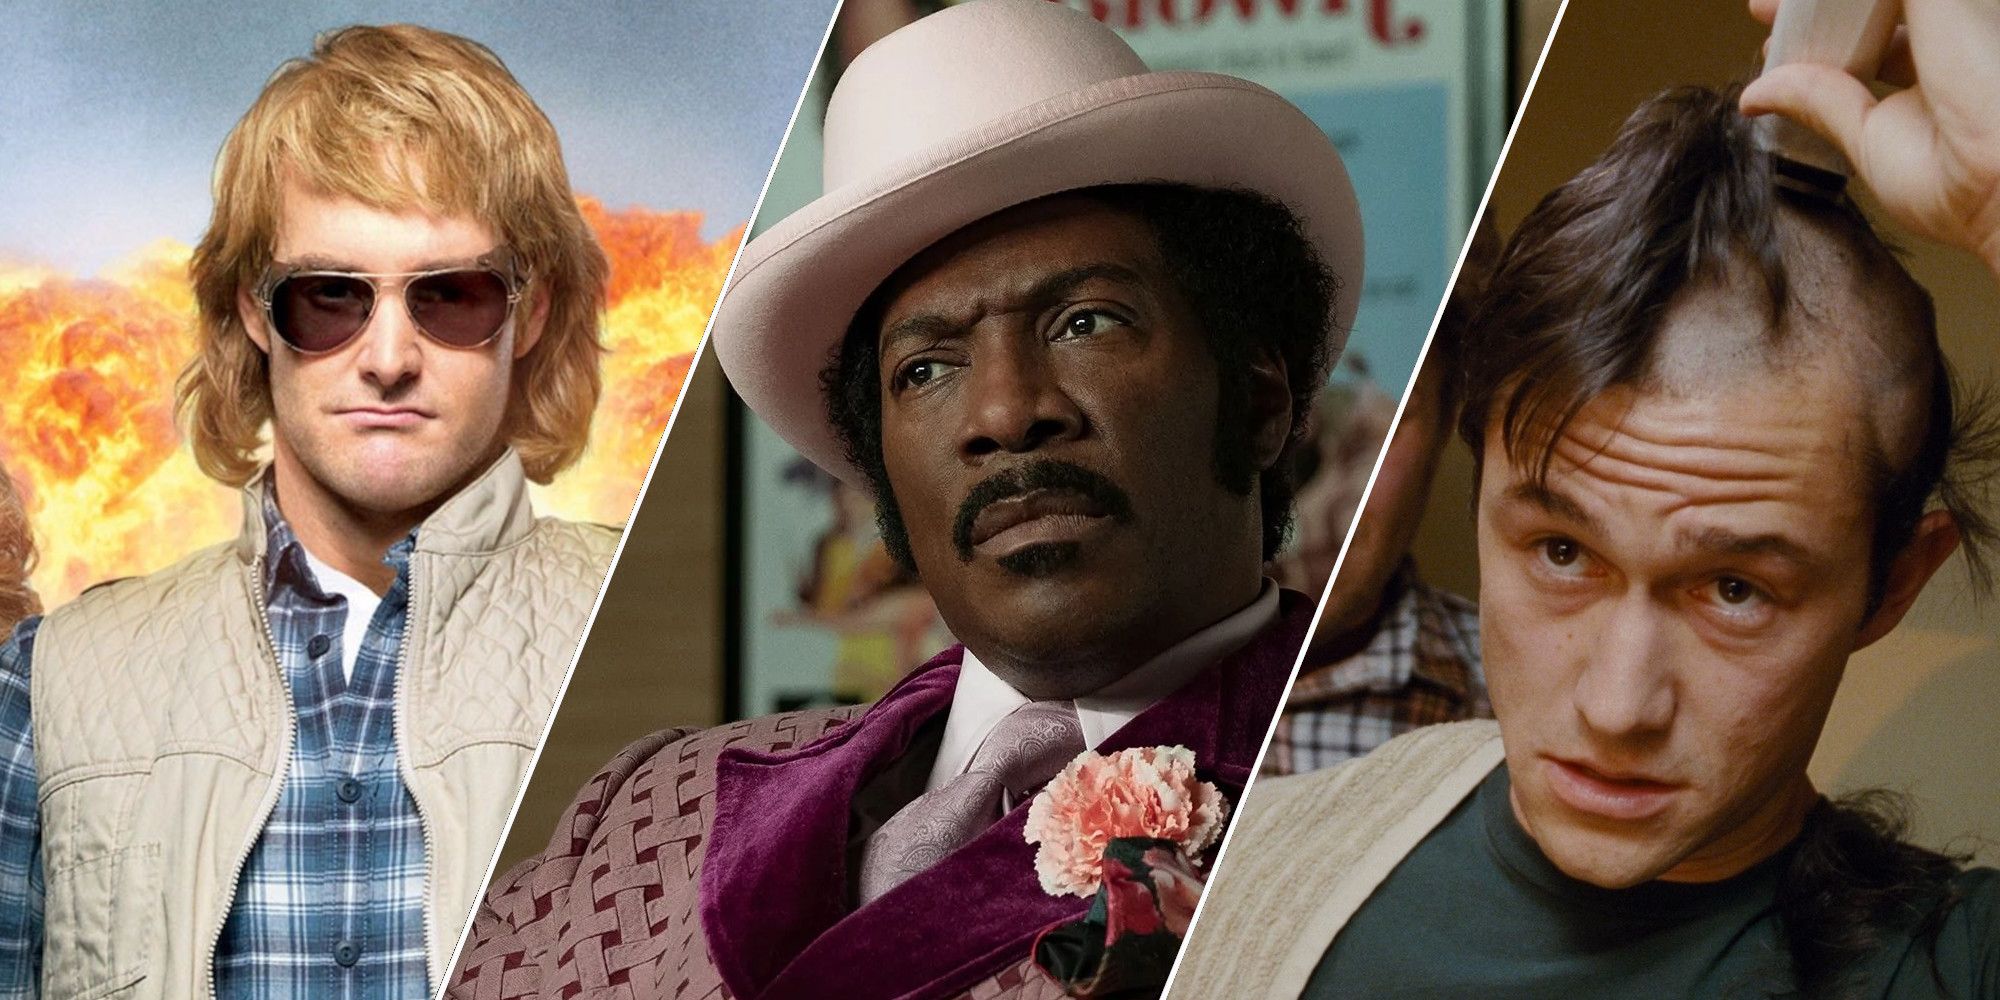 A collage of underrated comedies from the 2010s, featuring stills from MacGruber, Dolemite Is My Name, and 50/50